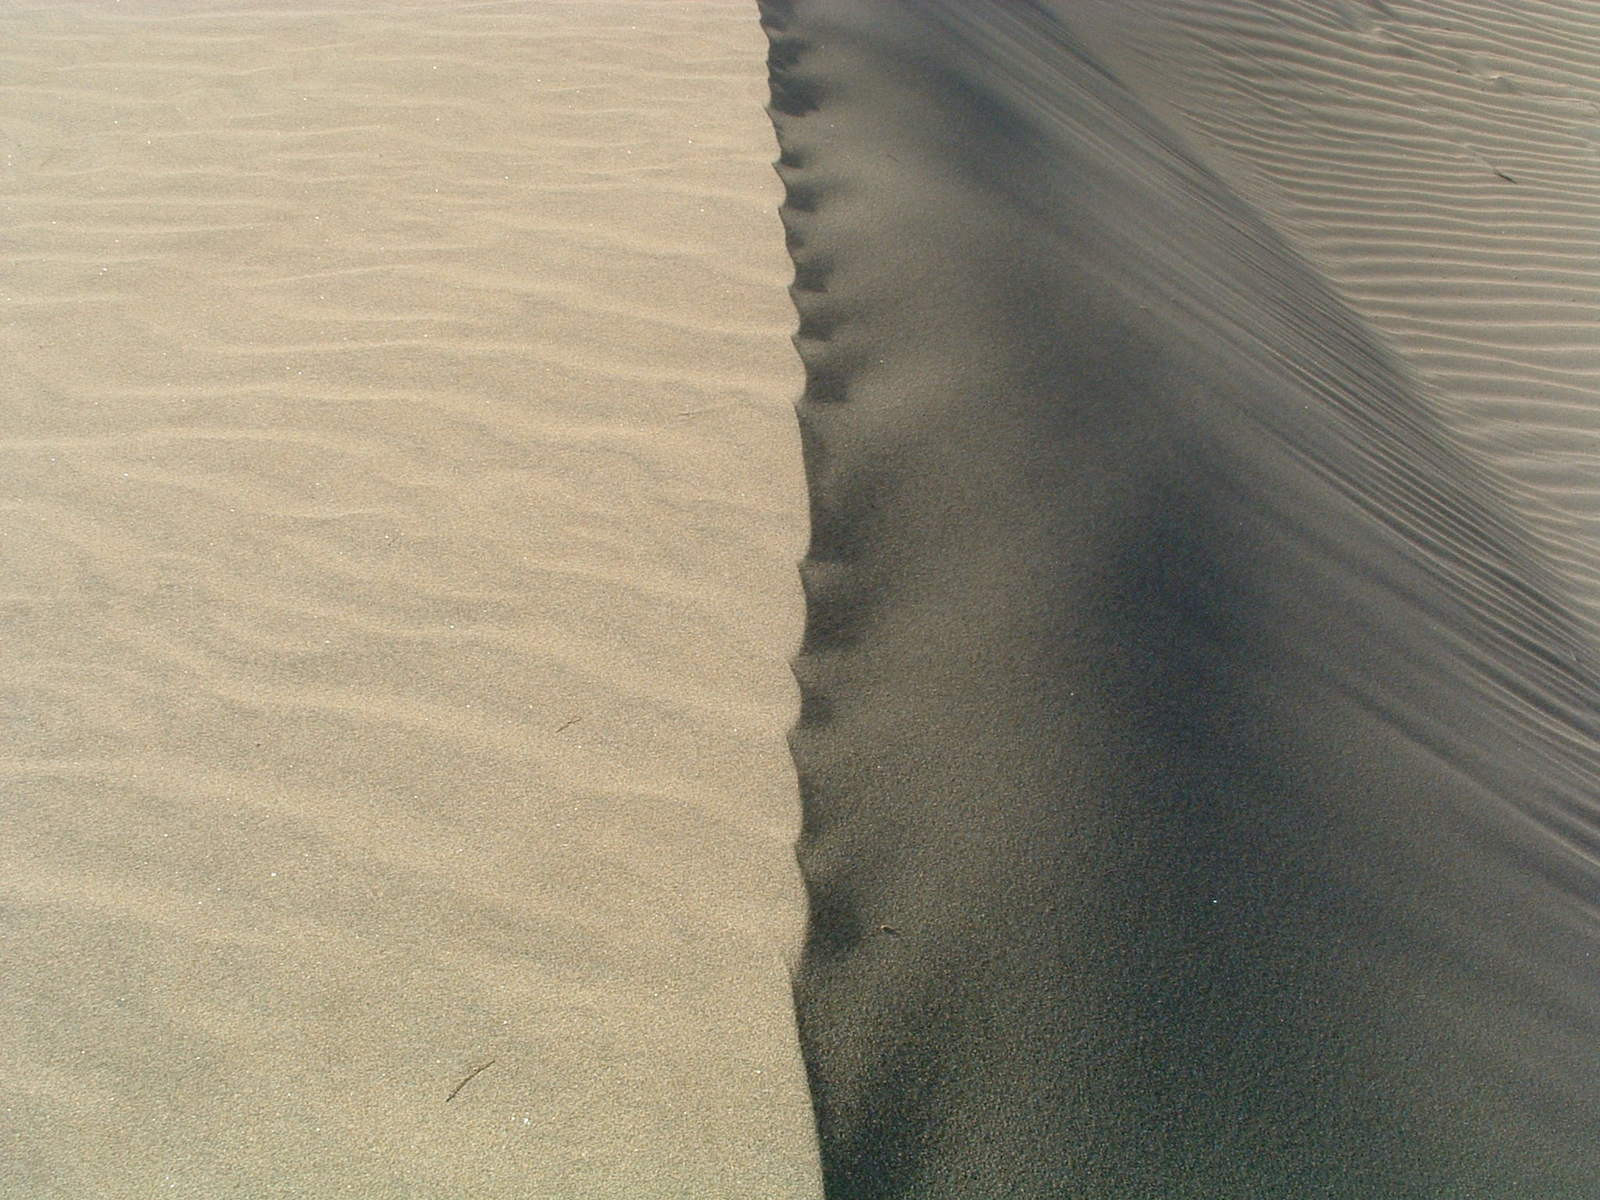 two tracks in the sand in the desert